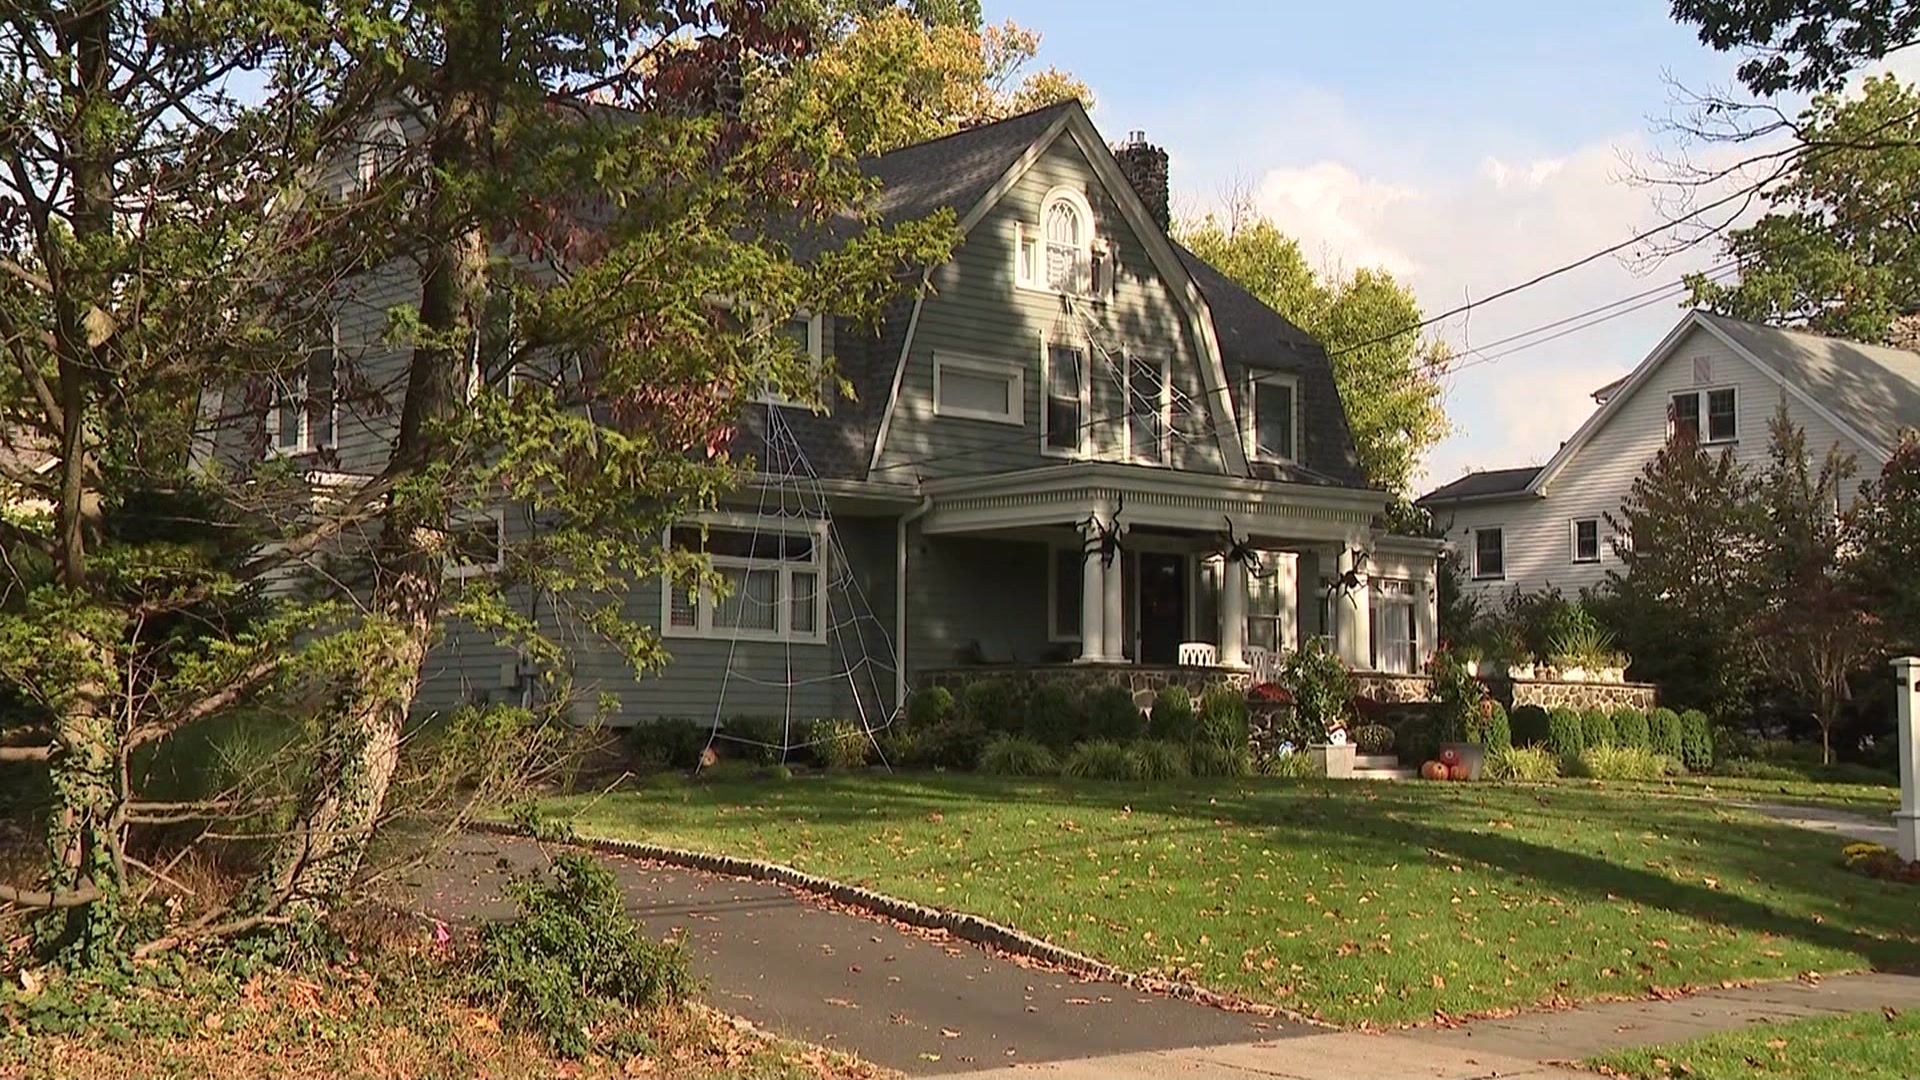 New Jersey Family Terrorized by 'The Watcher' Sells Home at a Loss